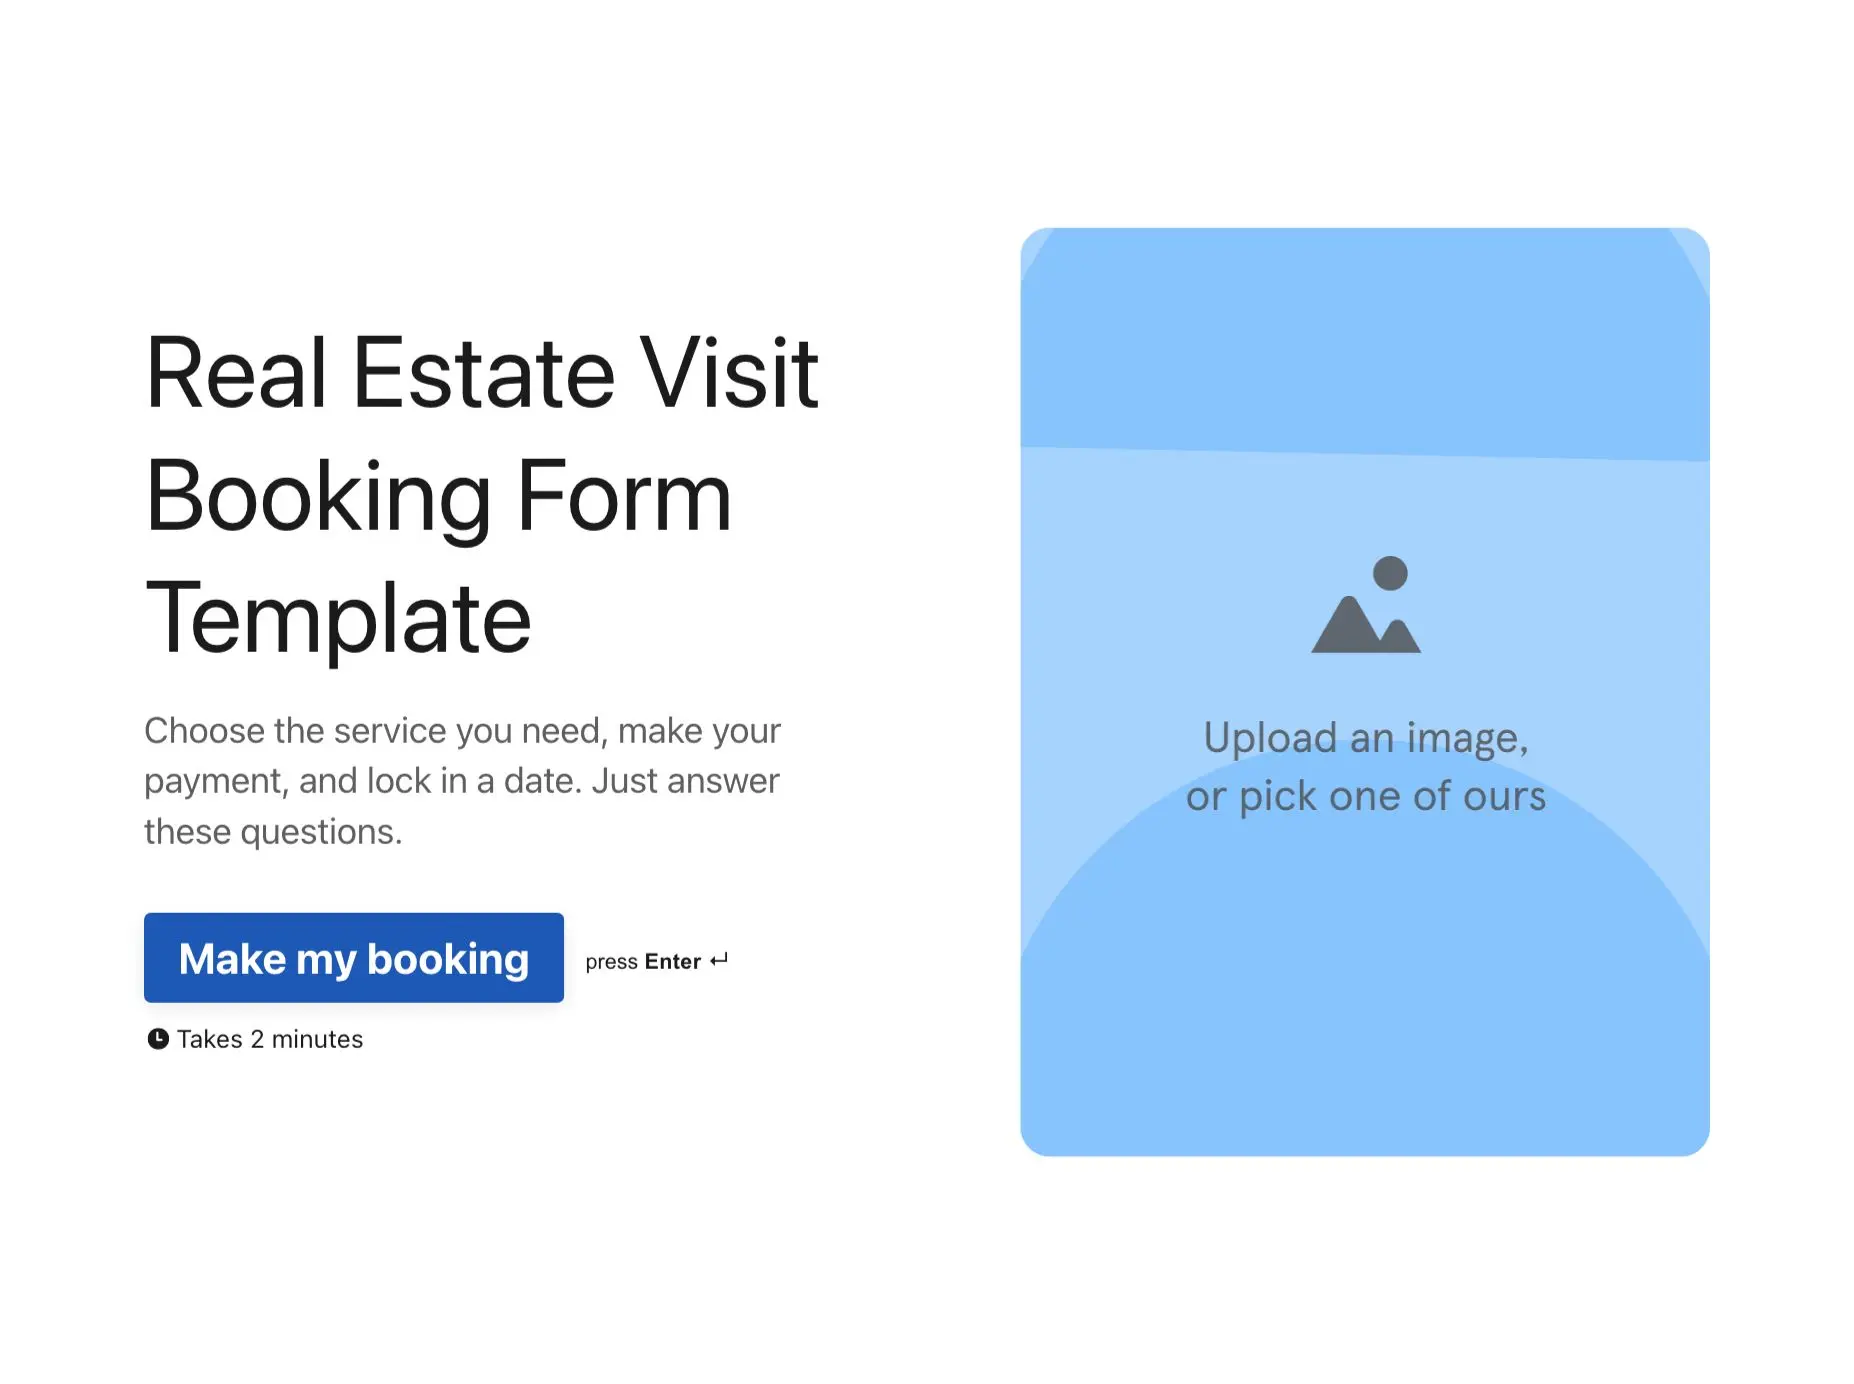 Real Estate Visit Booking Form Template Hero